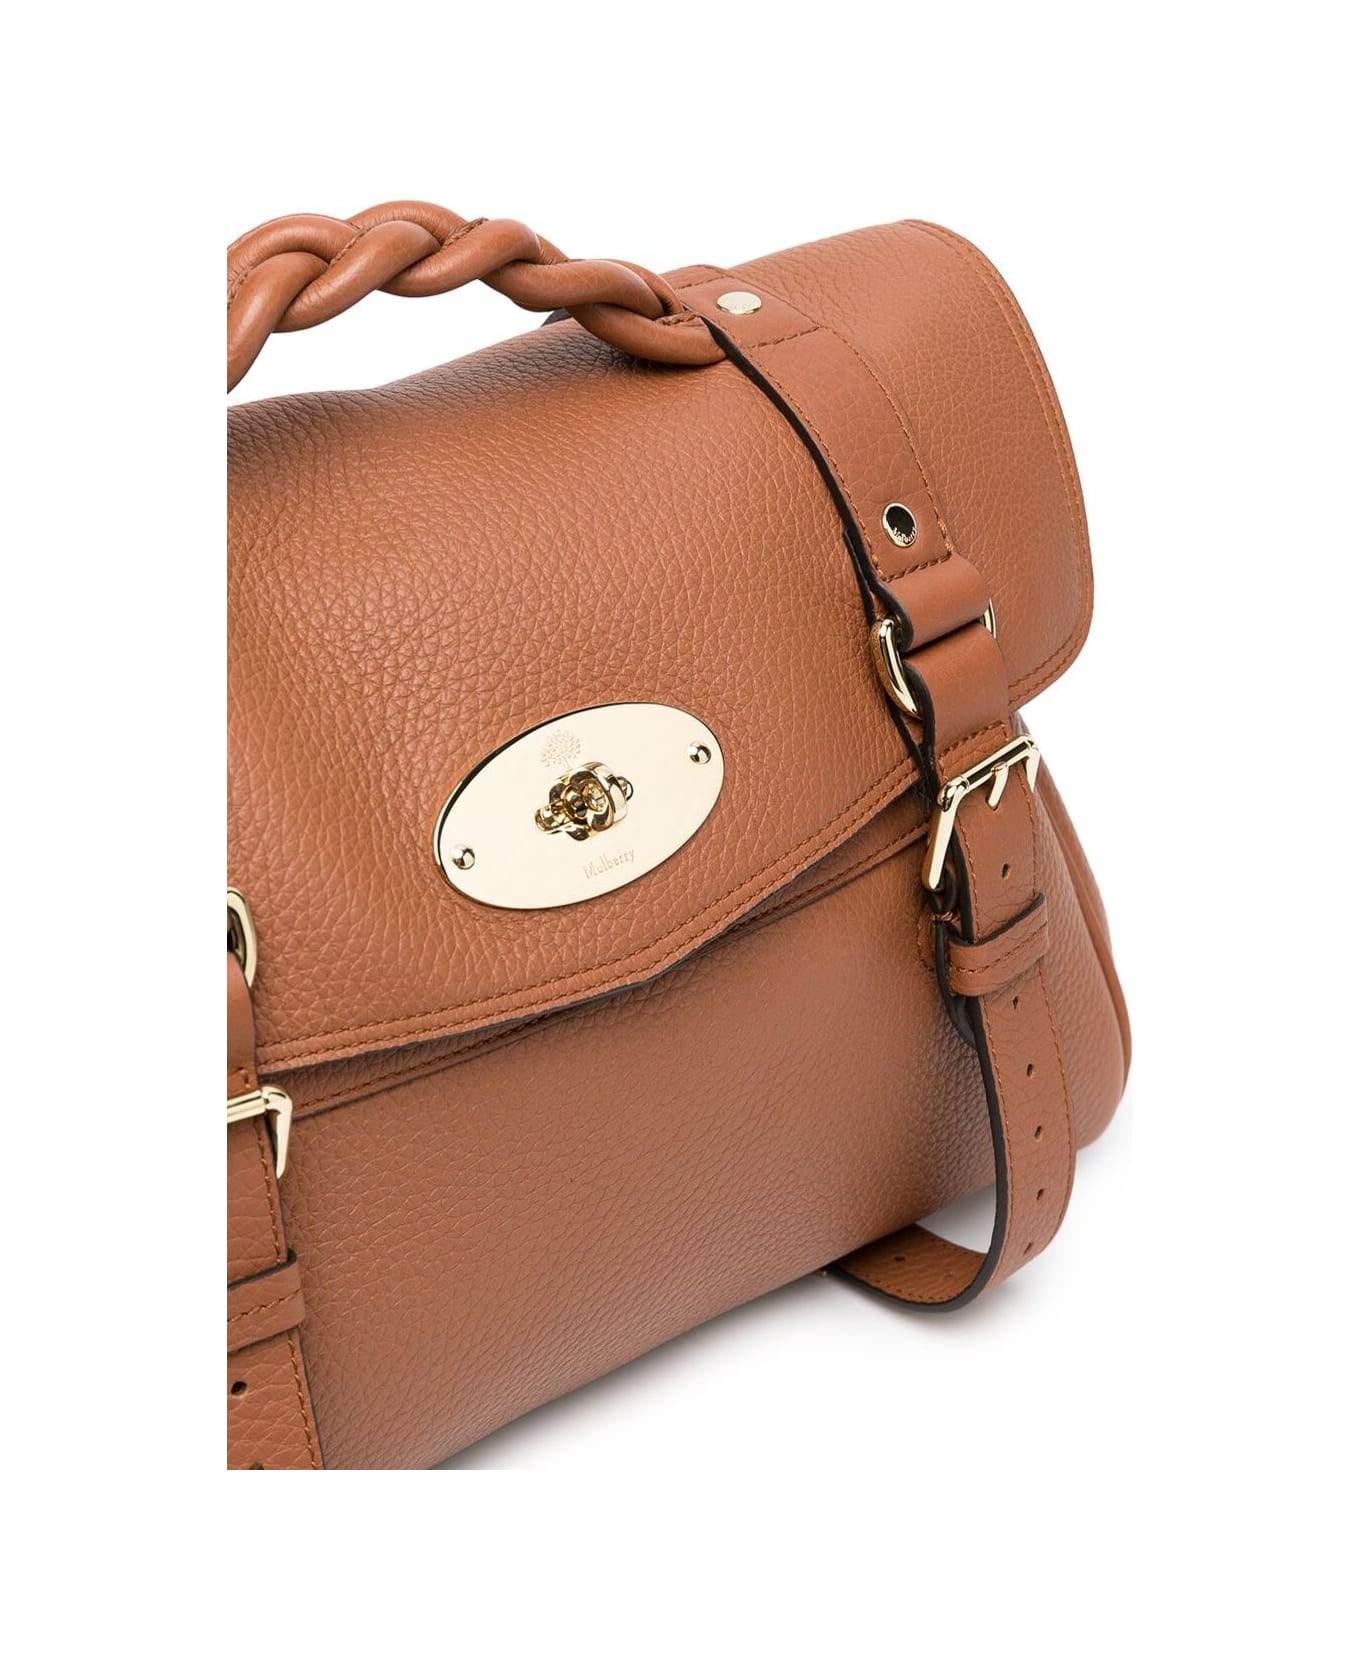 Mulberry Alexa Heavy Brown Leather Crossbody Bag Mulberry Woman - Beige トートバッグ